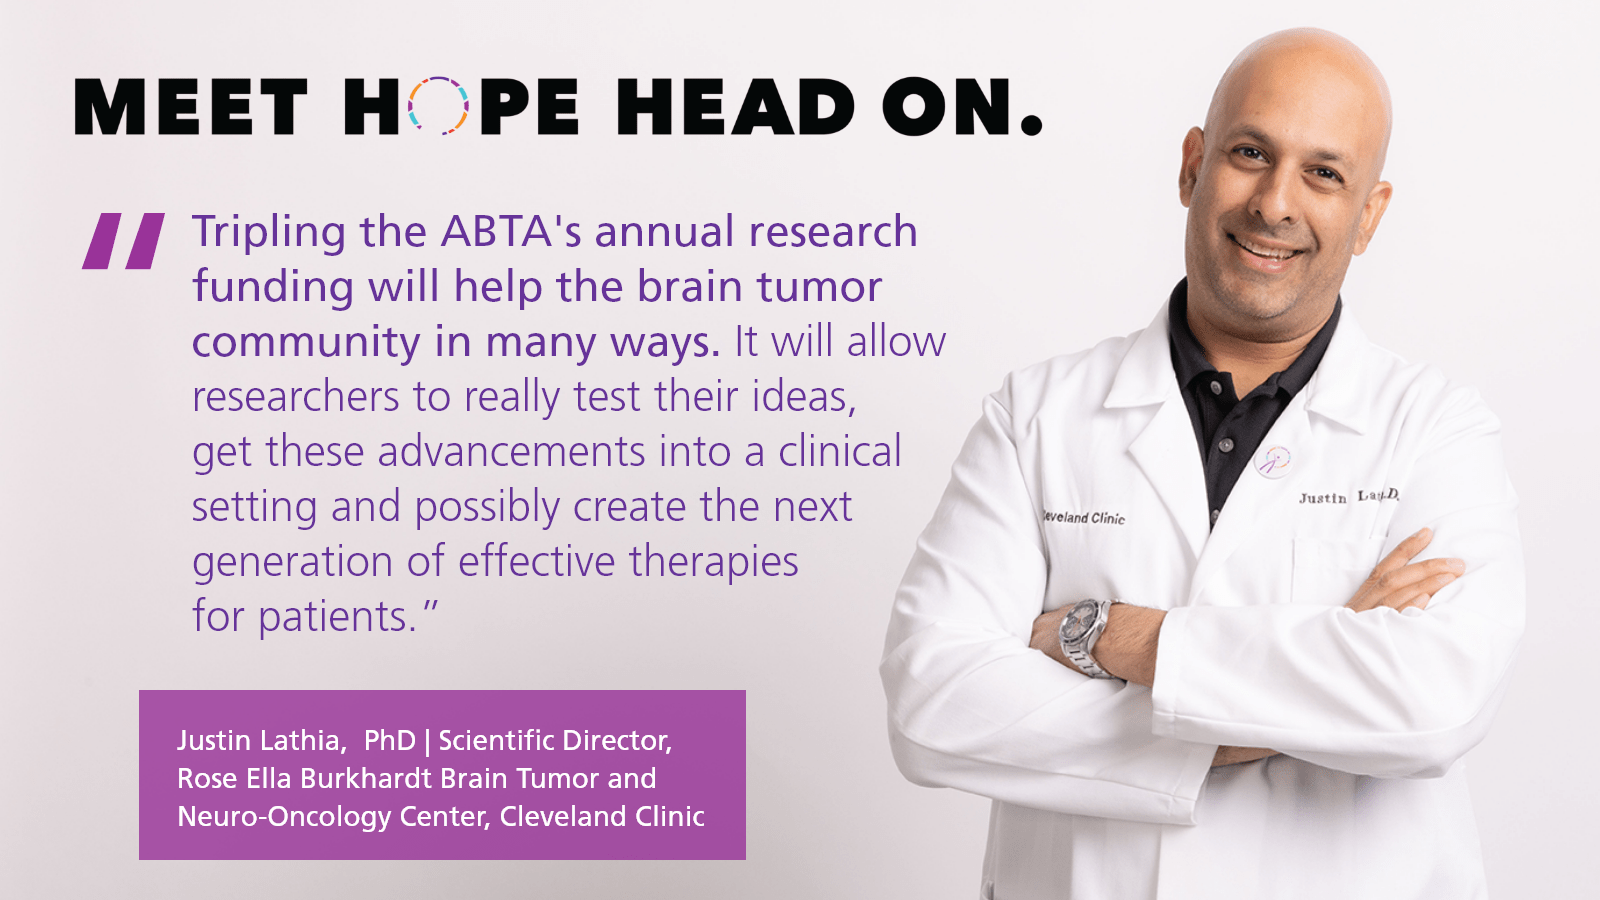 "Tripling the ABTA's annual research funding will help the brain tumor community in many ways. It's going to allow researchers to really test their innovative ideas, get these advancements into a clinical setting and possibly create the next generation of effective therapies for patients.” - Justin Lathia | Scientific Director of the Rose Ella Burkhardt Brain Tumor and Neuro-Oncology Center at the Cleveland Clinic